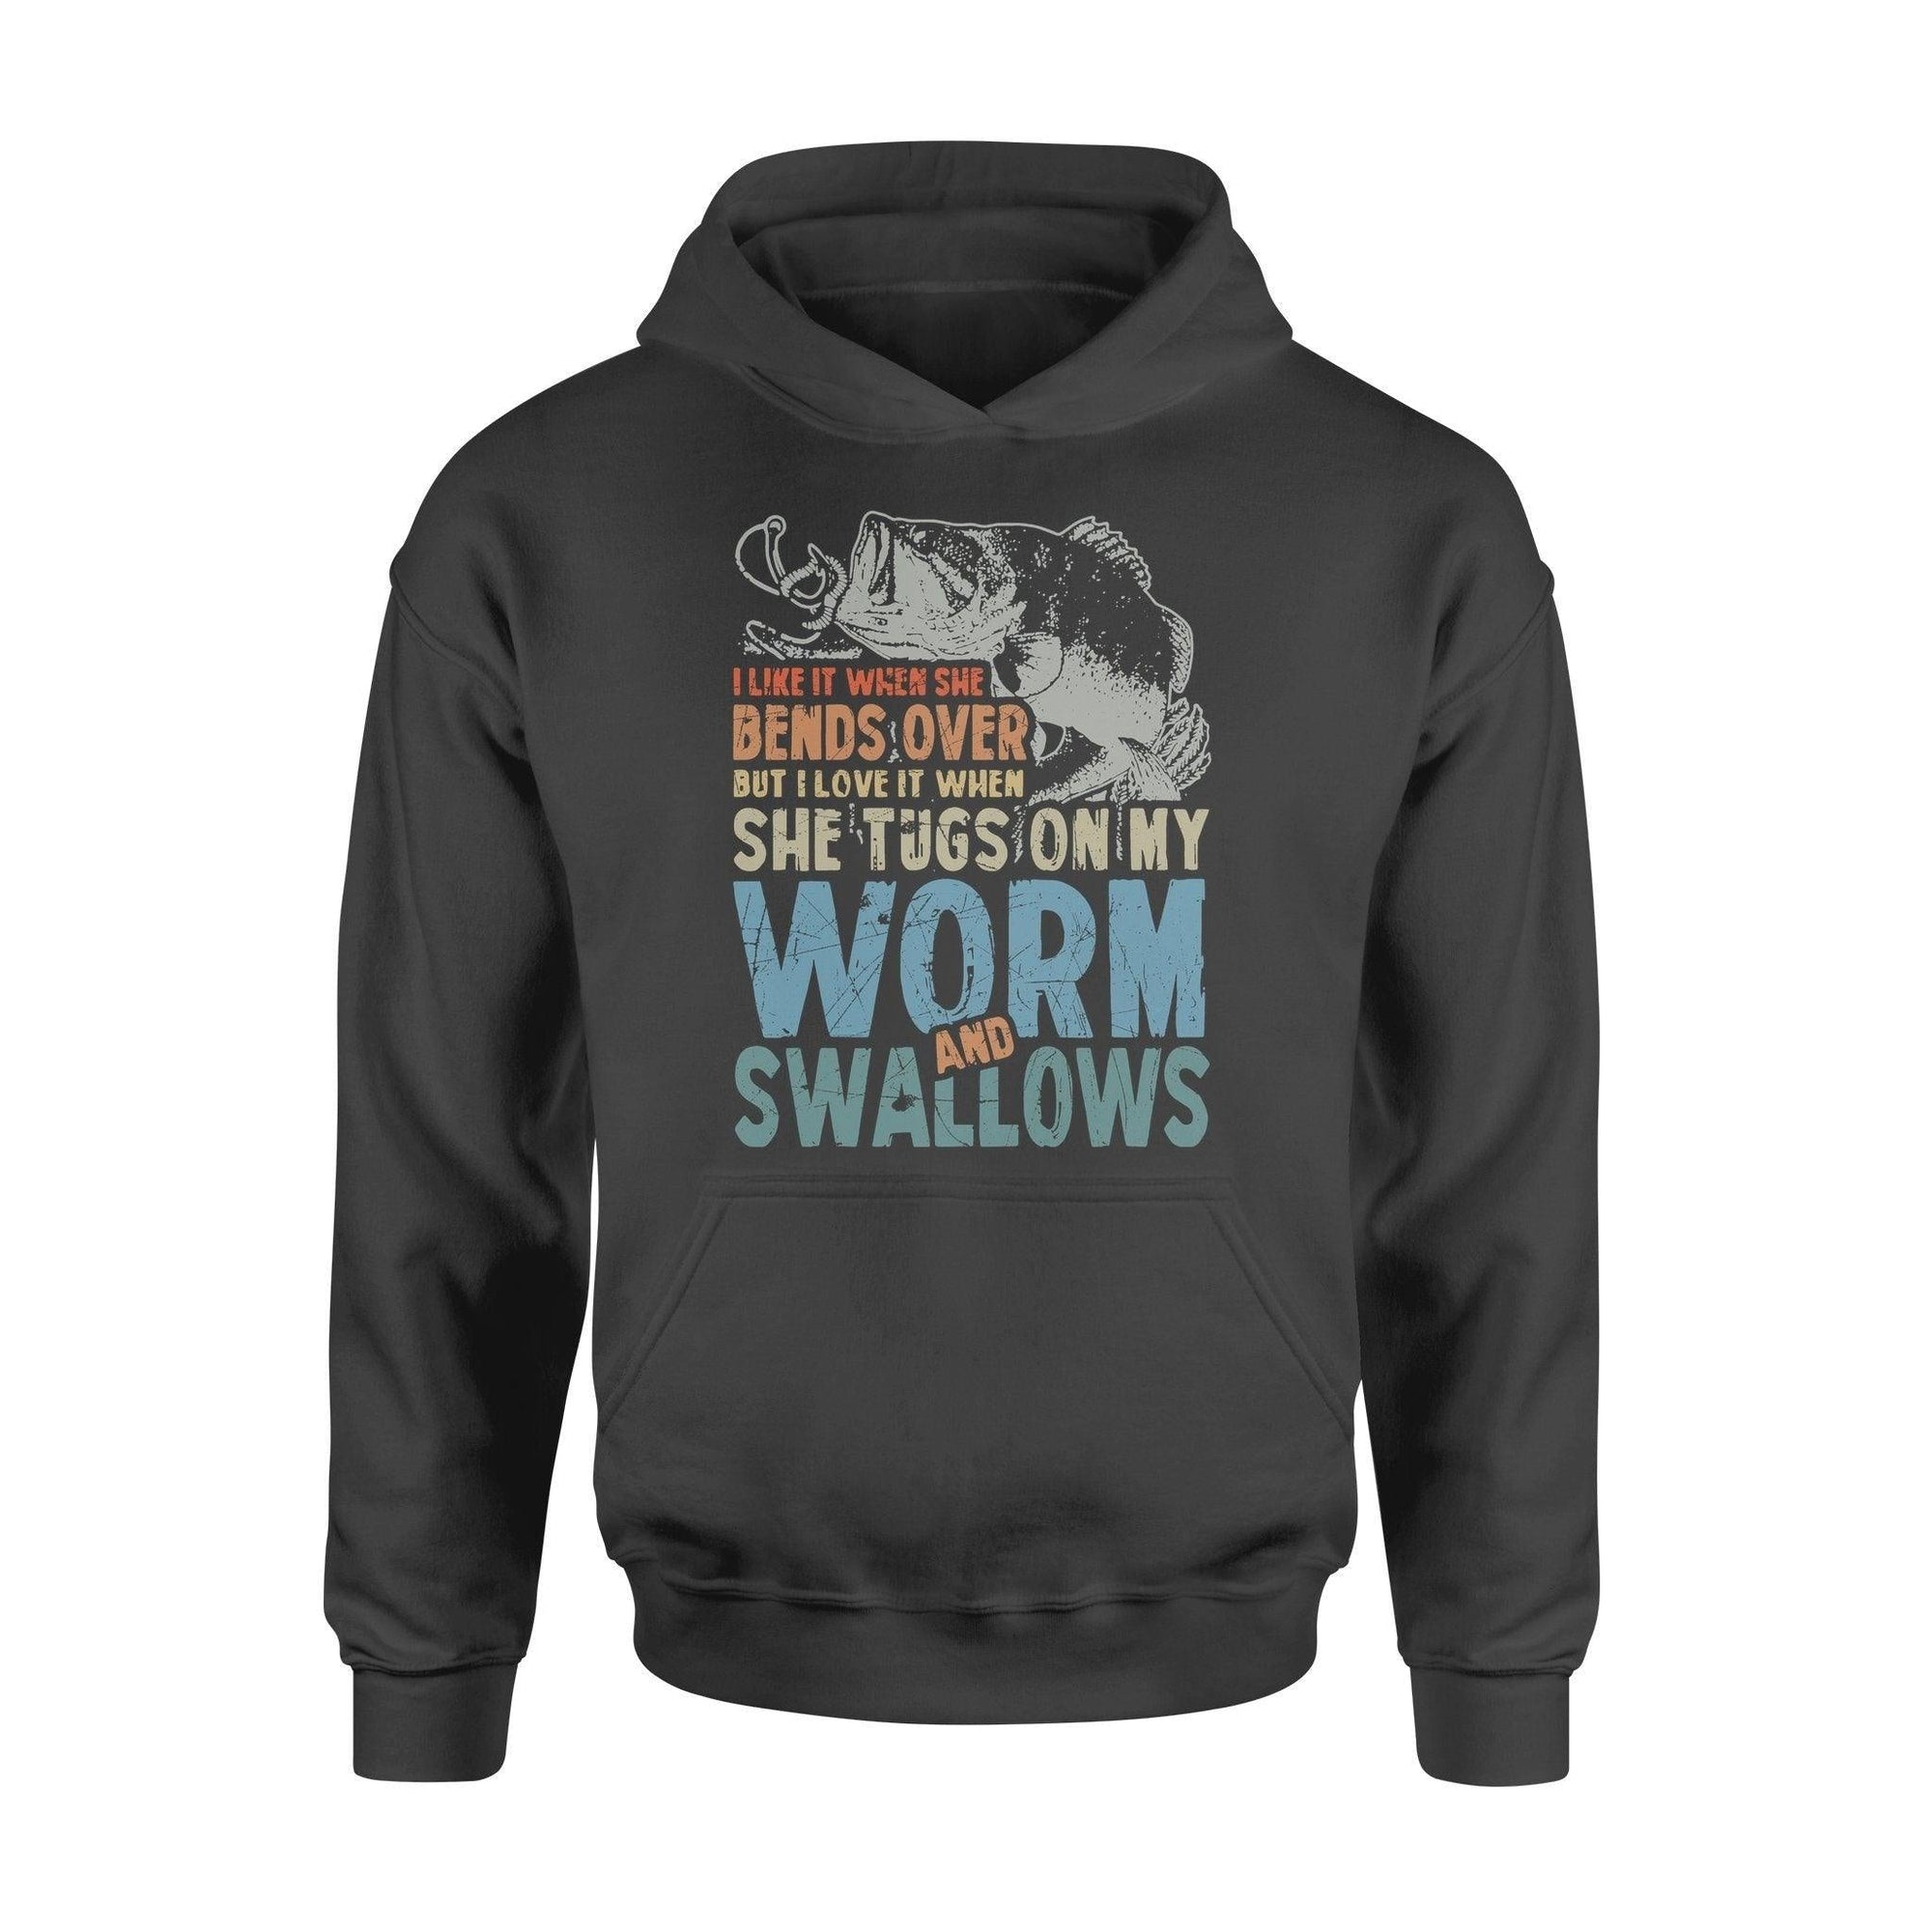 Fishing Tugs And Swallows - Standard Hoodie - PERSONAL84